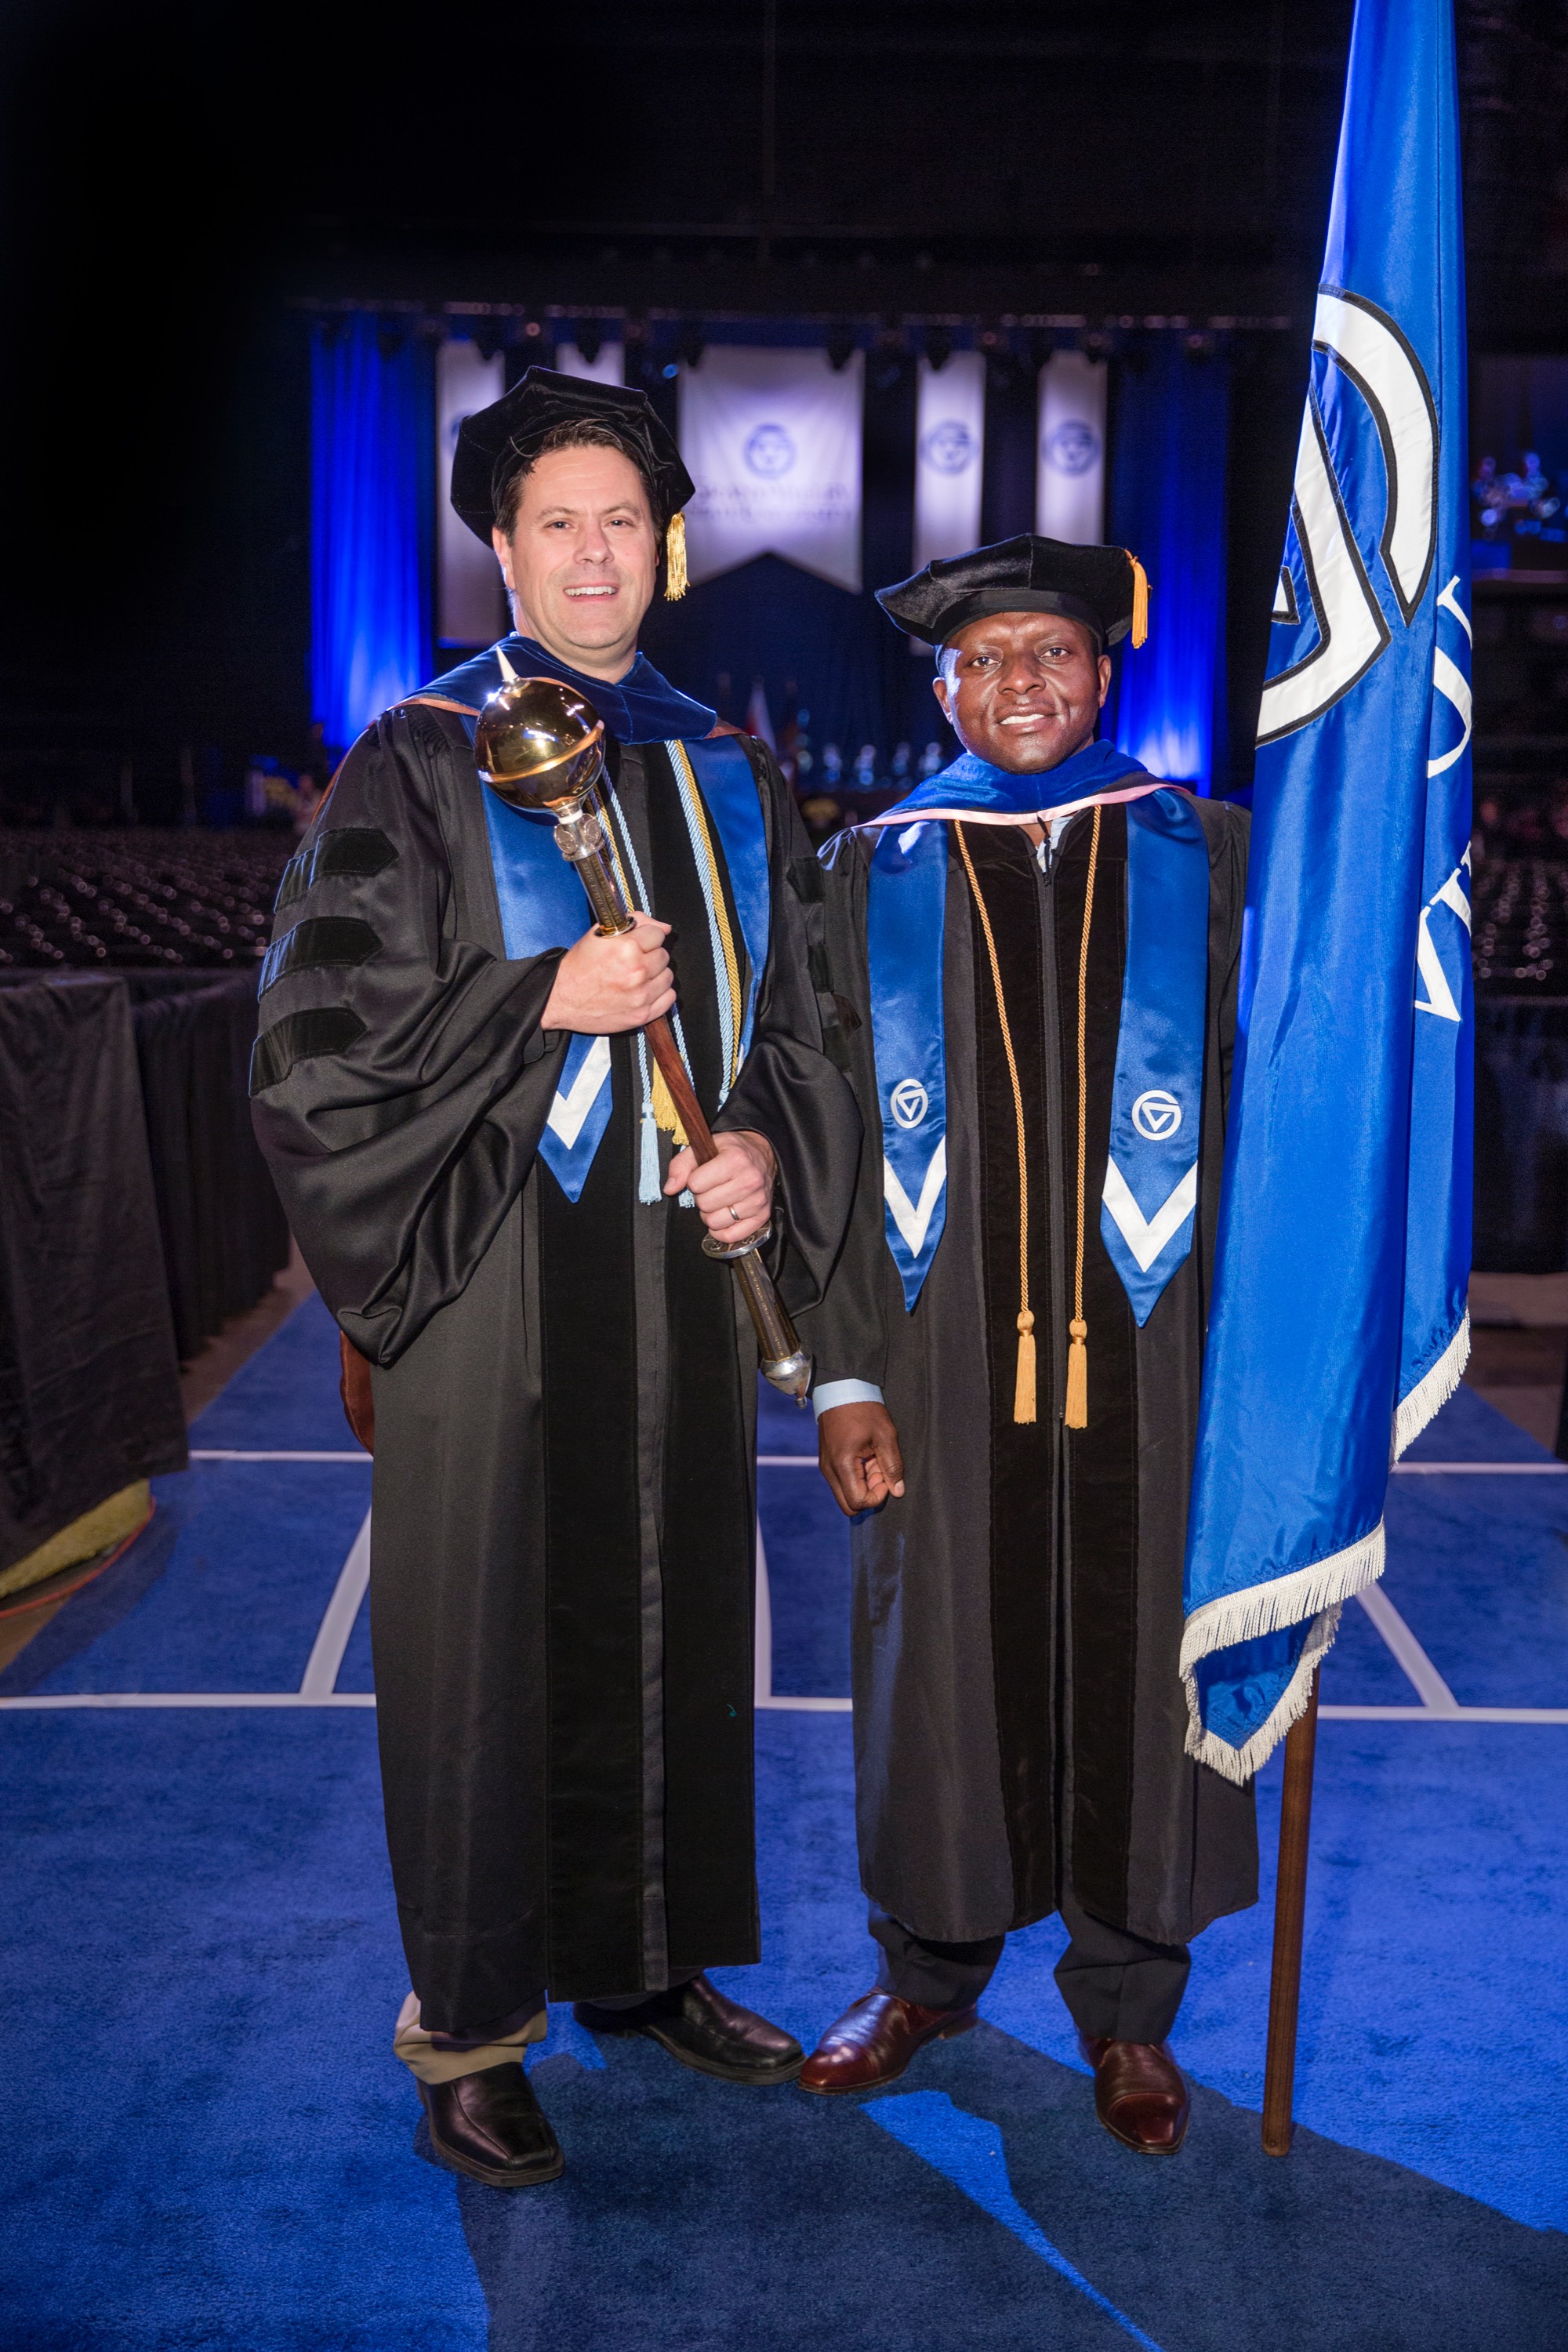 Two faculty members smiling. One holding the GVSU Mace and the other holding a GVSU flag